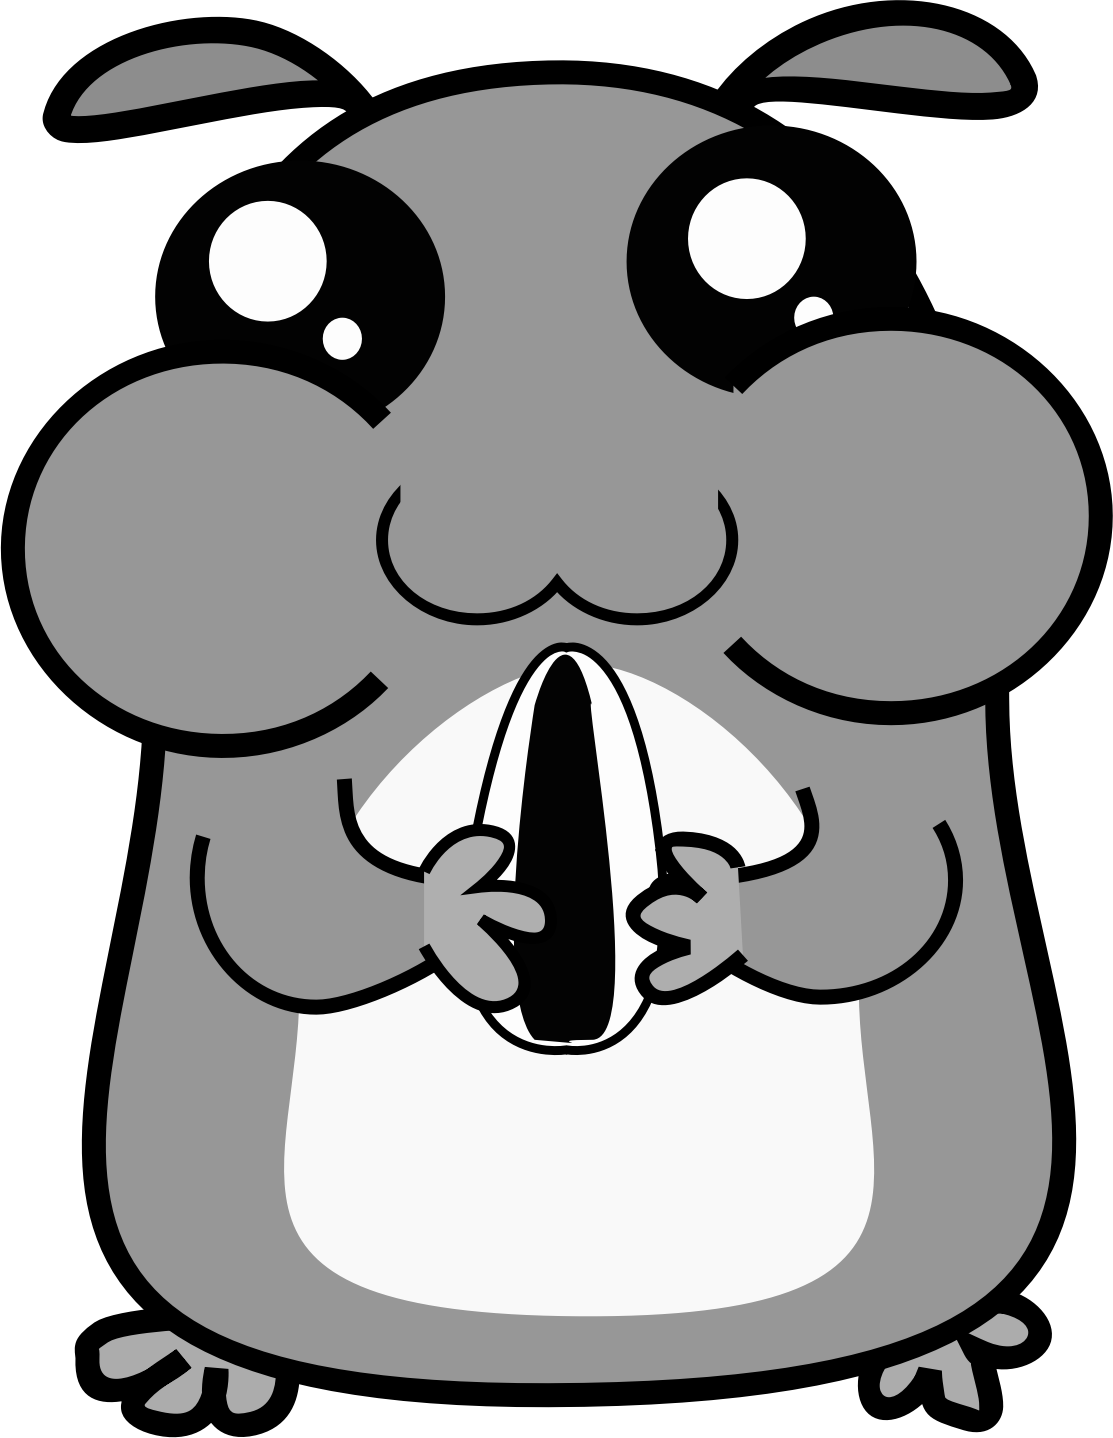 Hamster clipart face. Page of clipartblack com